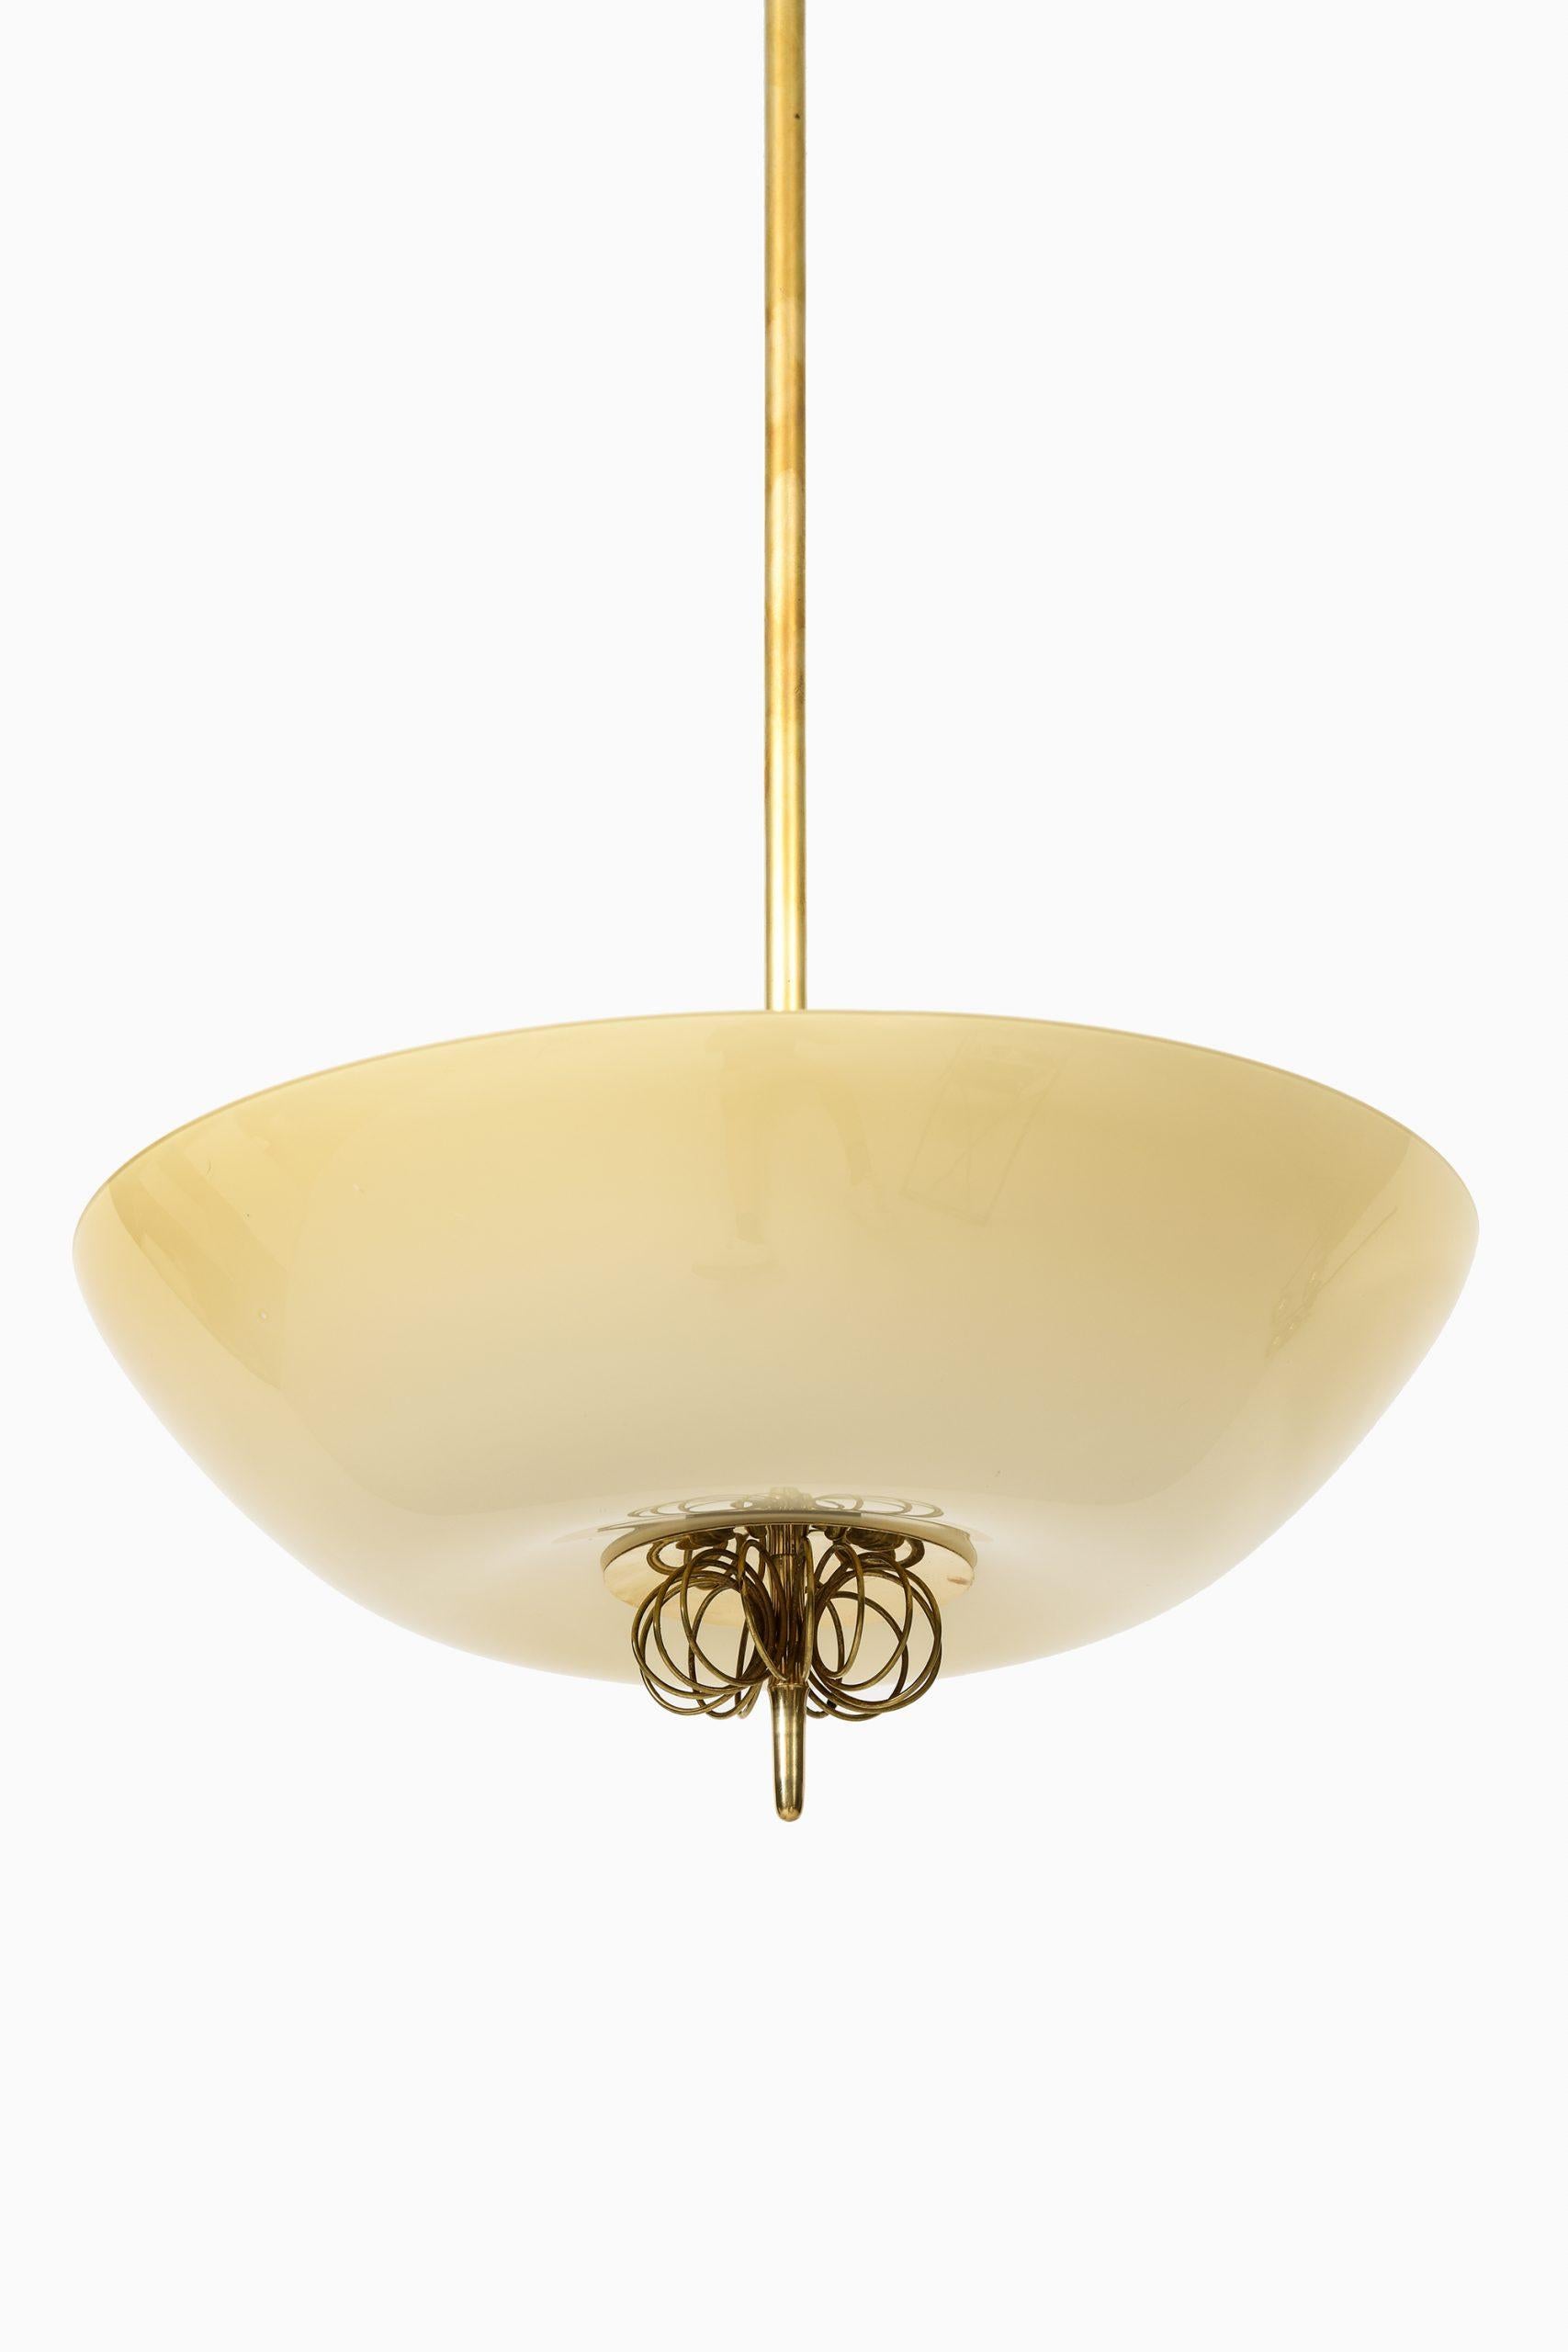 Scandinavian Modern Paavo Tynell Ceiling Lamps Produced by Taito Oy in Finland